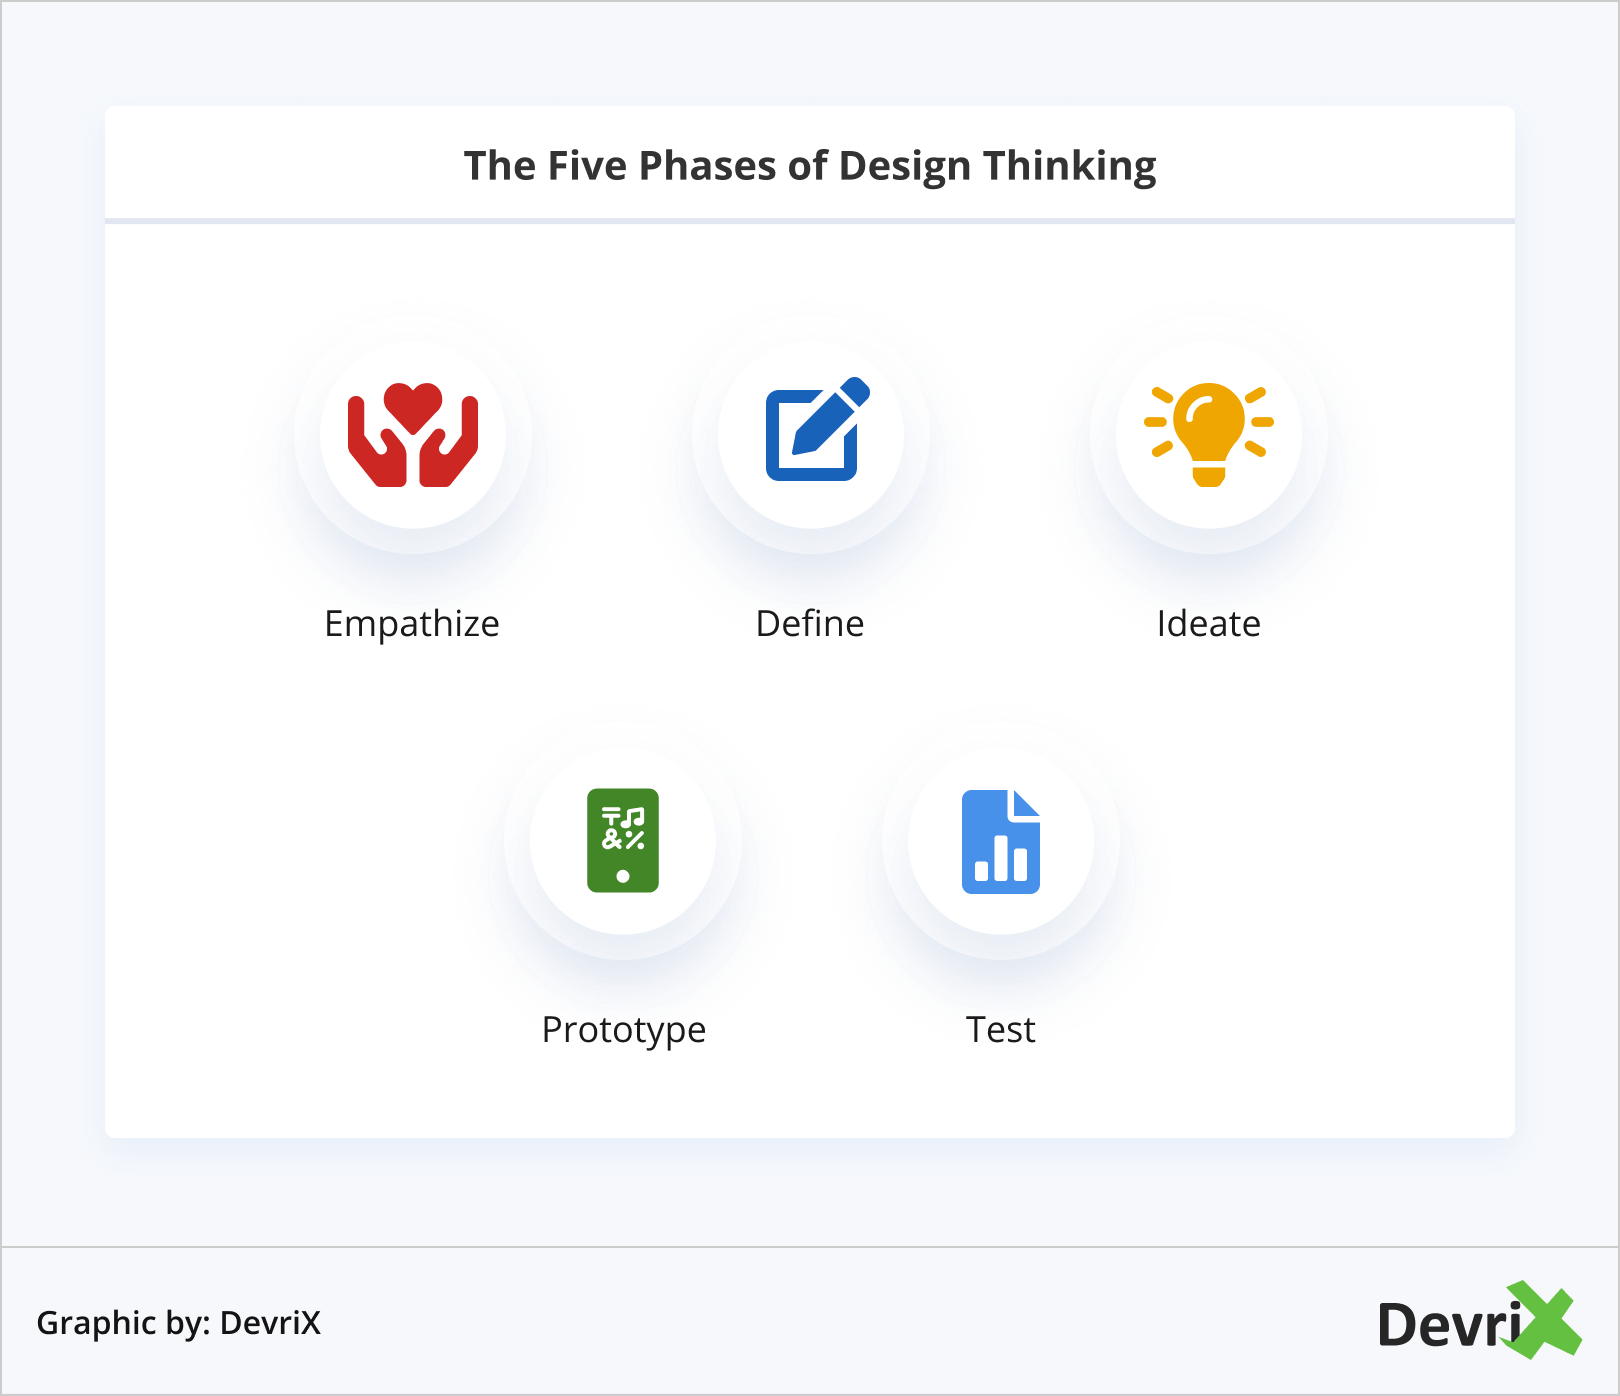 The Five Phases of Design Thinking